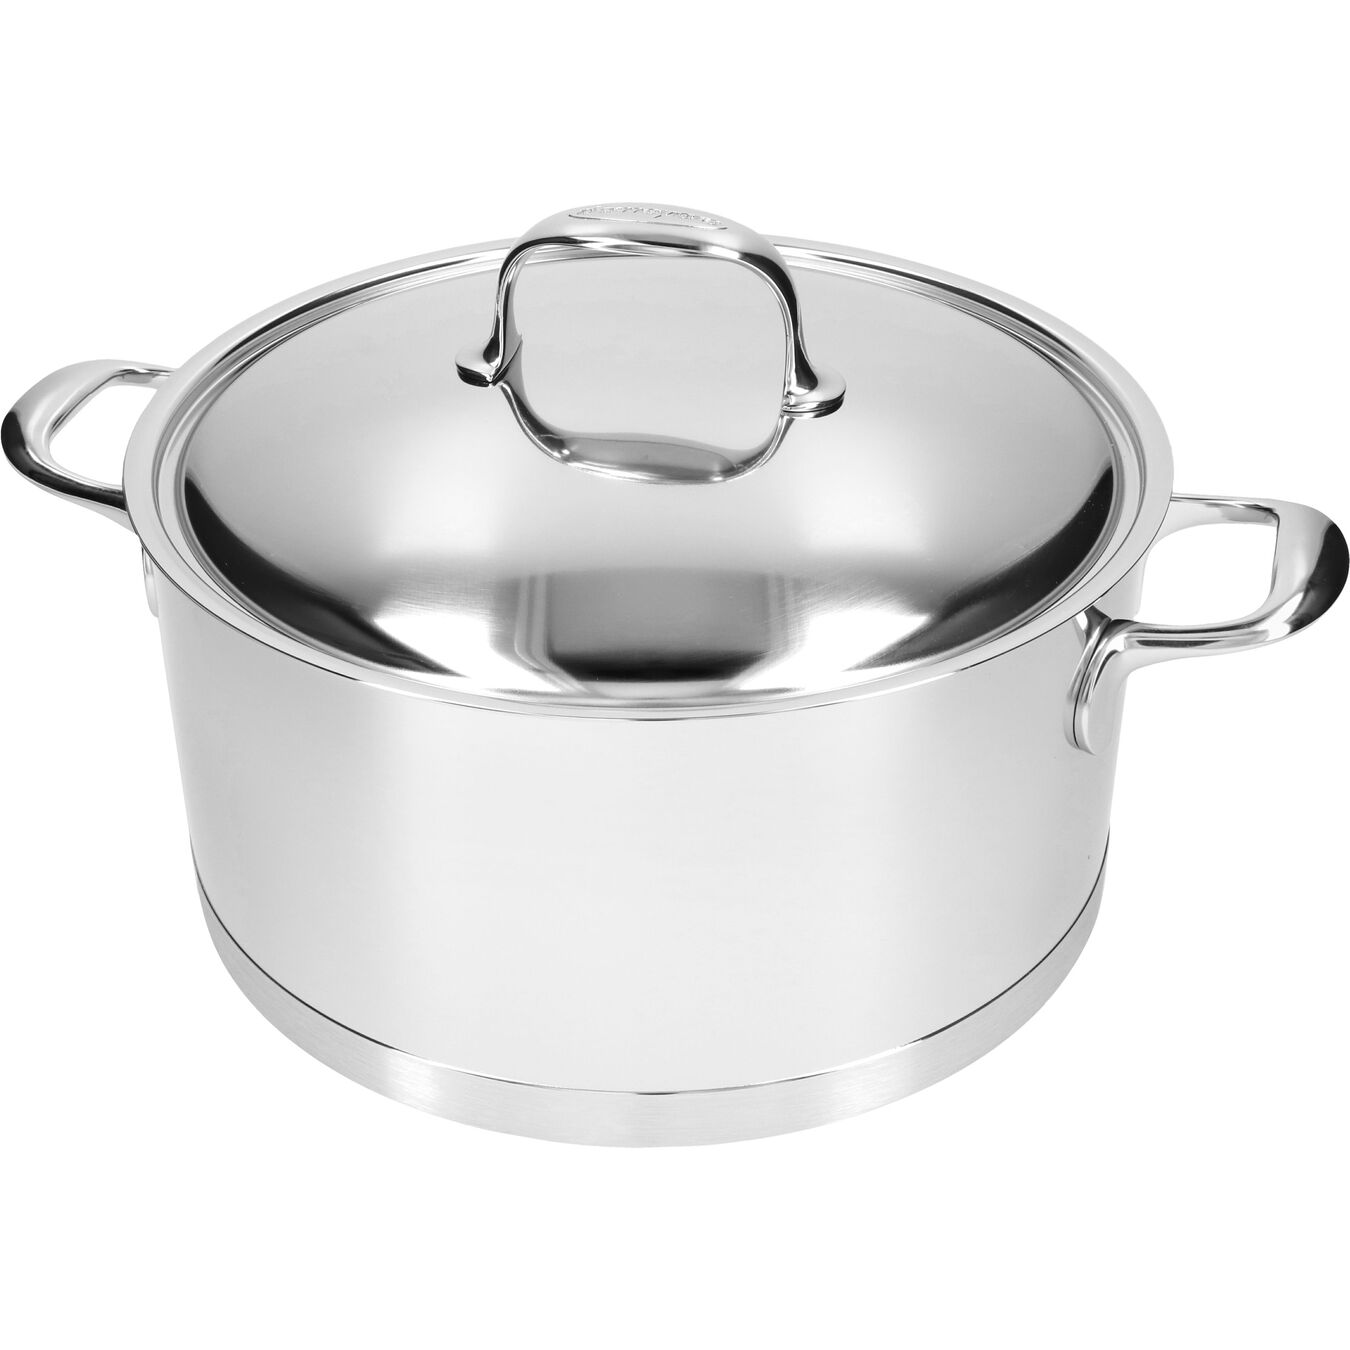 8.9 qt, 18/10 Stainless Steel, Dutch Oven with Lid,,large 6